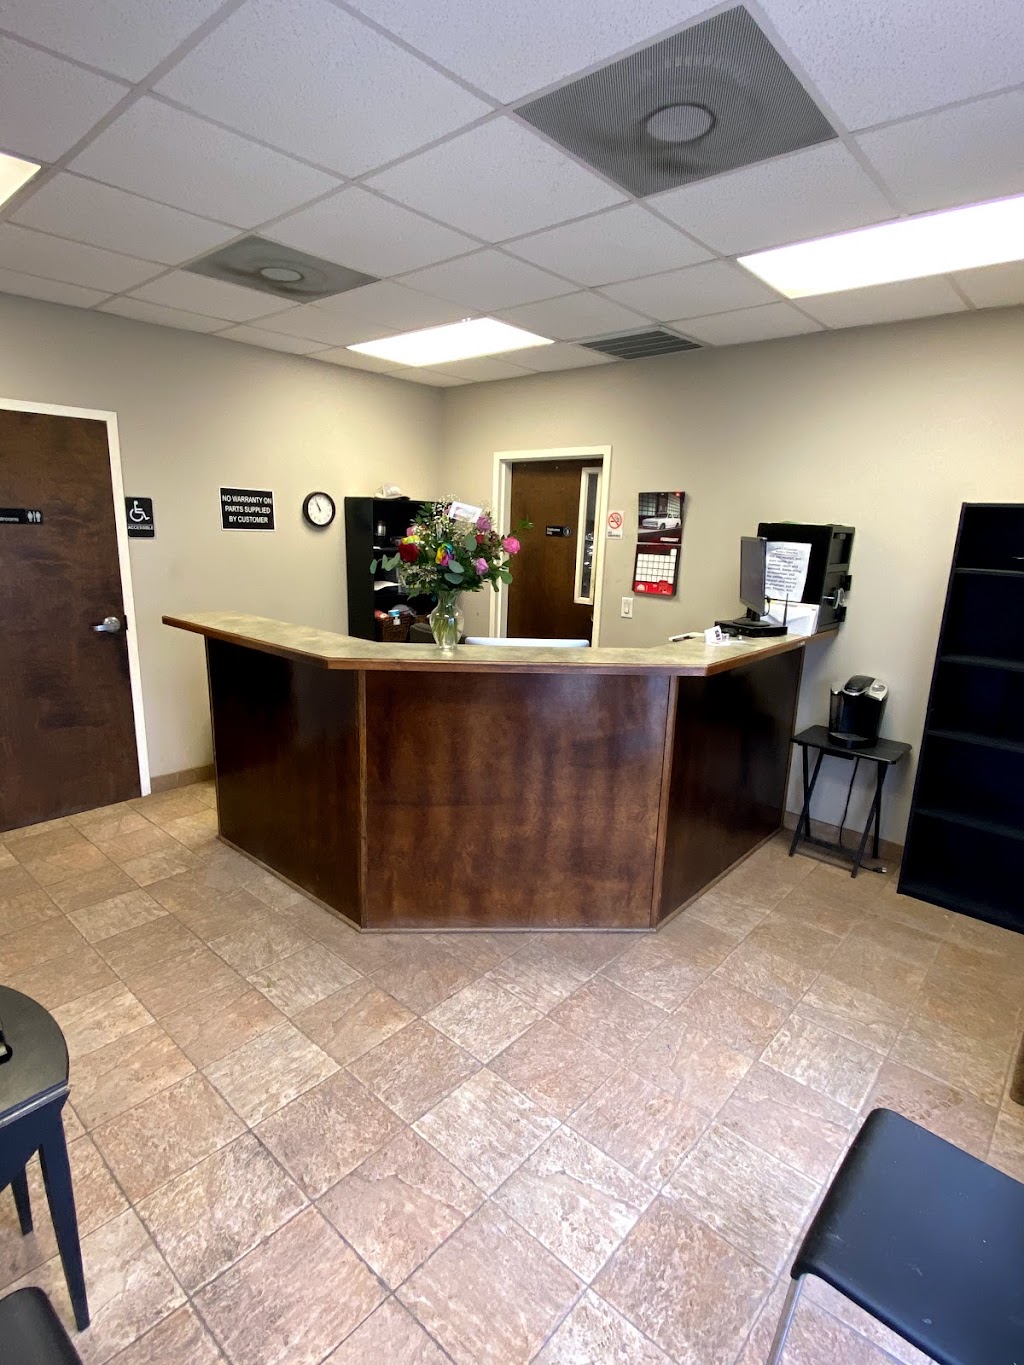 Bakers Automotive | 280 Medical Dr, Angier, NC 27501, USA | Phone: (919) 639-0644